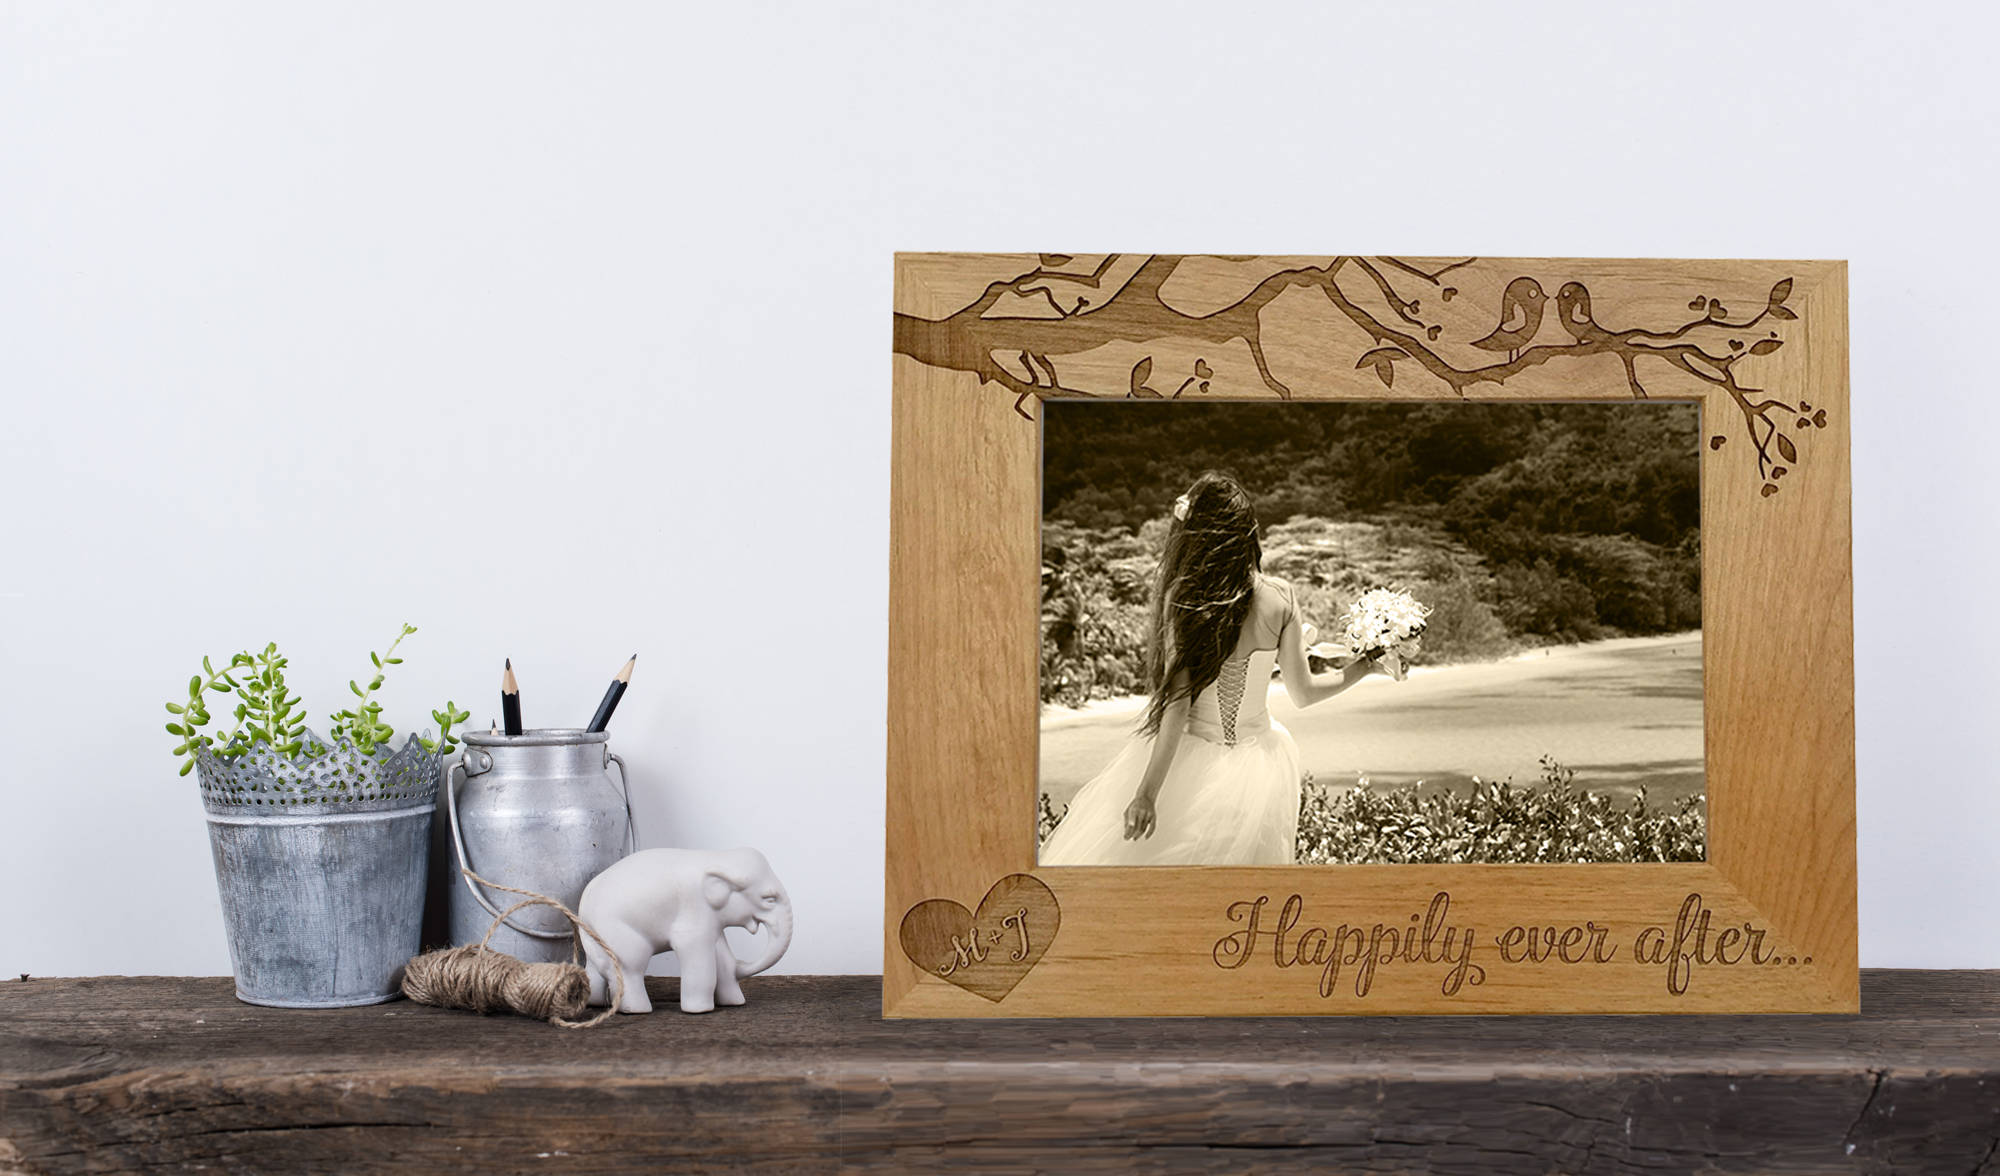 Custom Engraved Wooden Photo Album, with Lovedbirds Design on Front for Happy Couple, Perfect for Weddings and Anniversaries